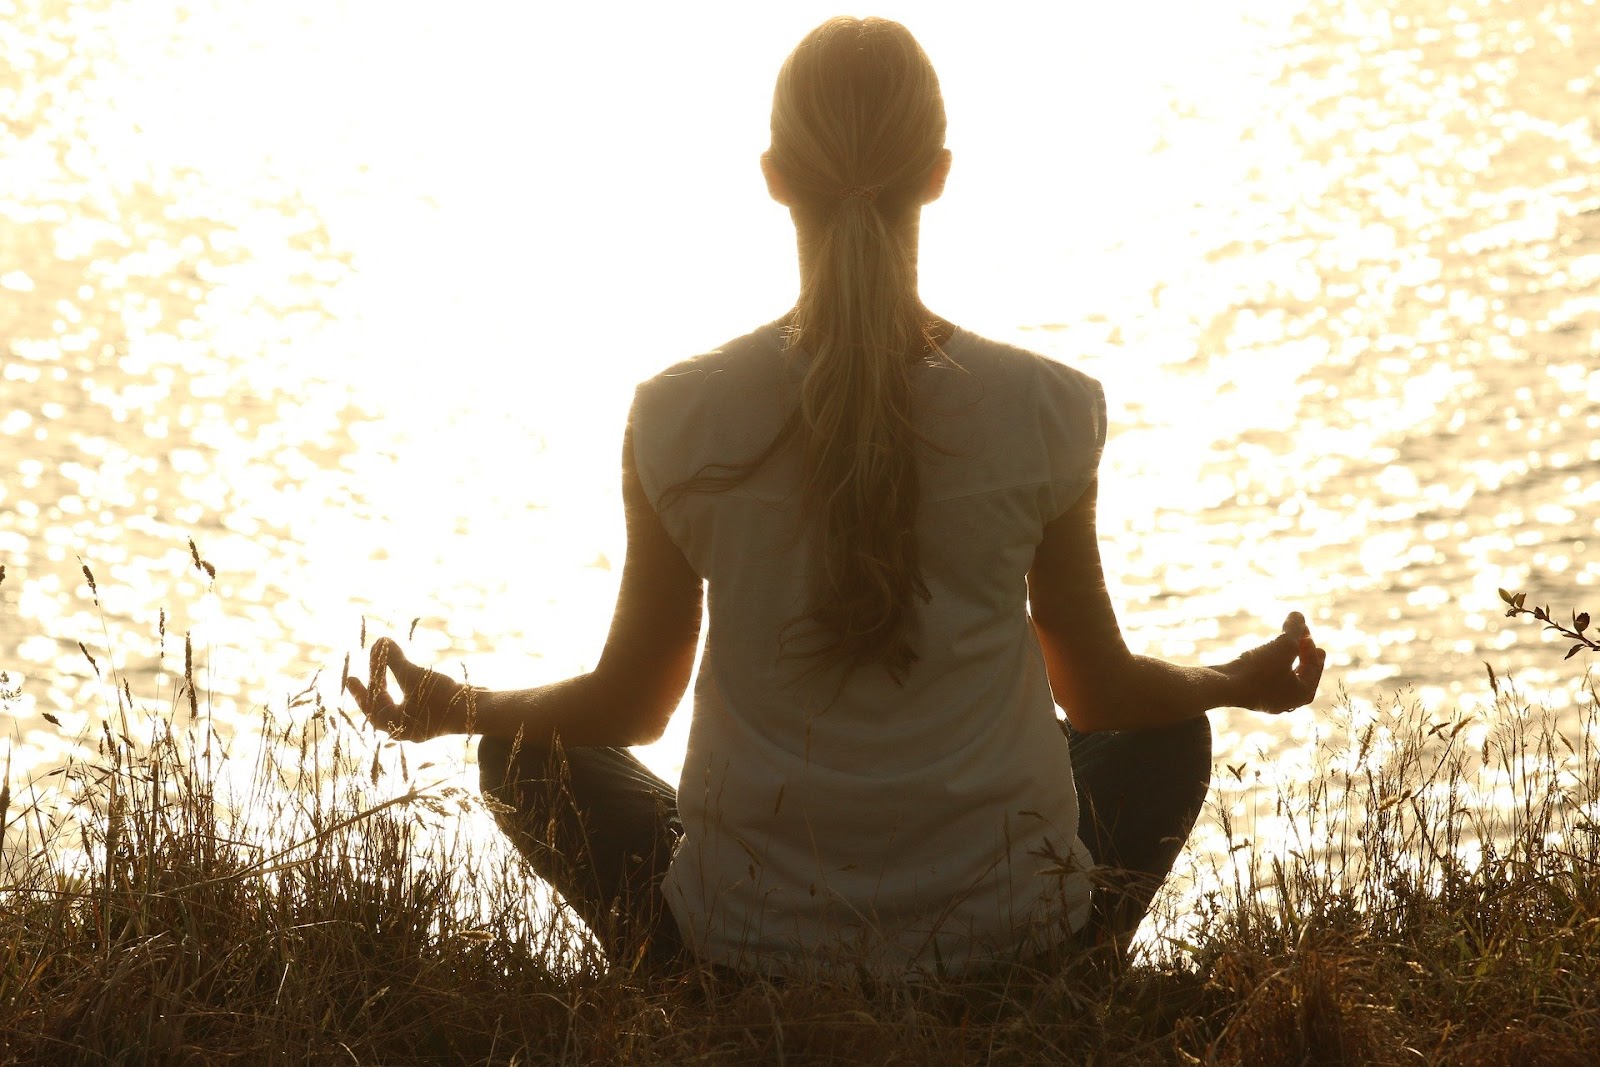 An image of a woman sitting outdoors in a meditation pose, overlooking a lack as the sun sets.